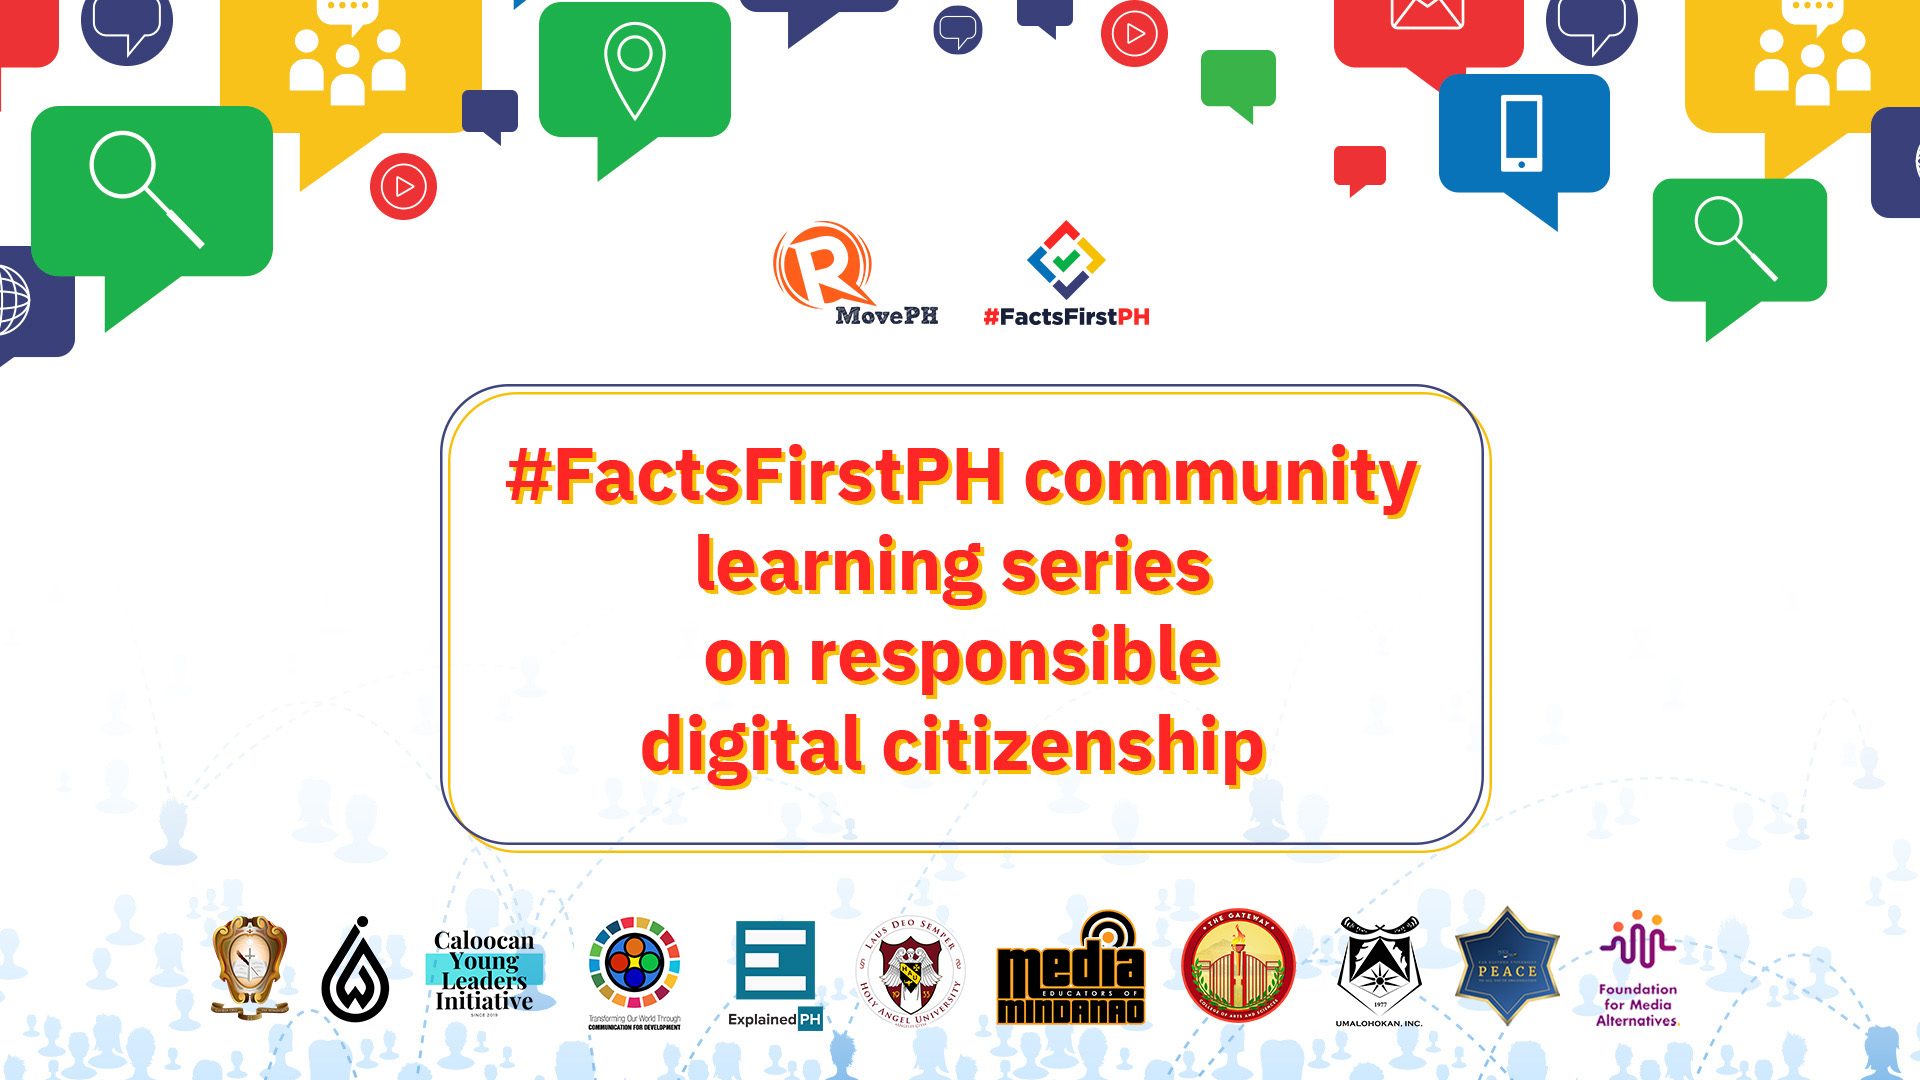 Join #FactsFirstPH community learning series on responsible digital citizenship